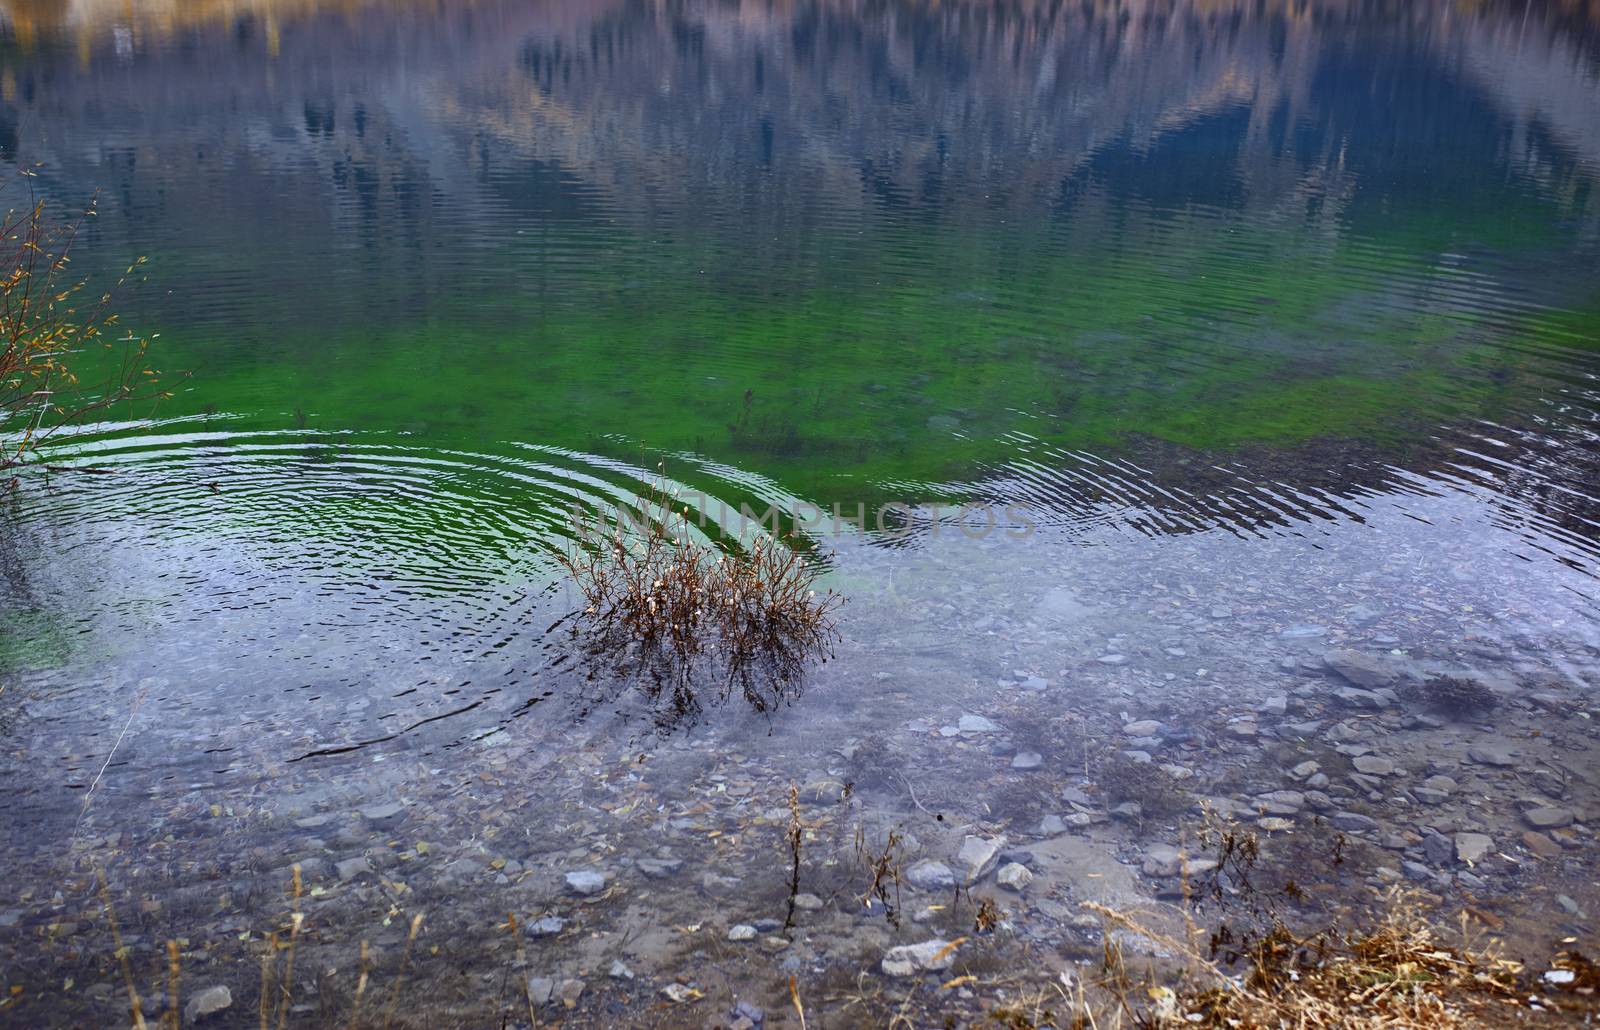 Ripples on the water in mountain lake. Canada